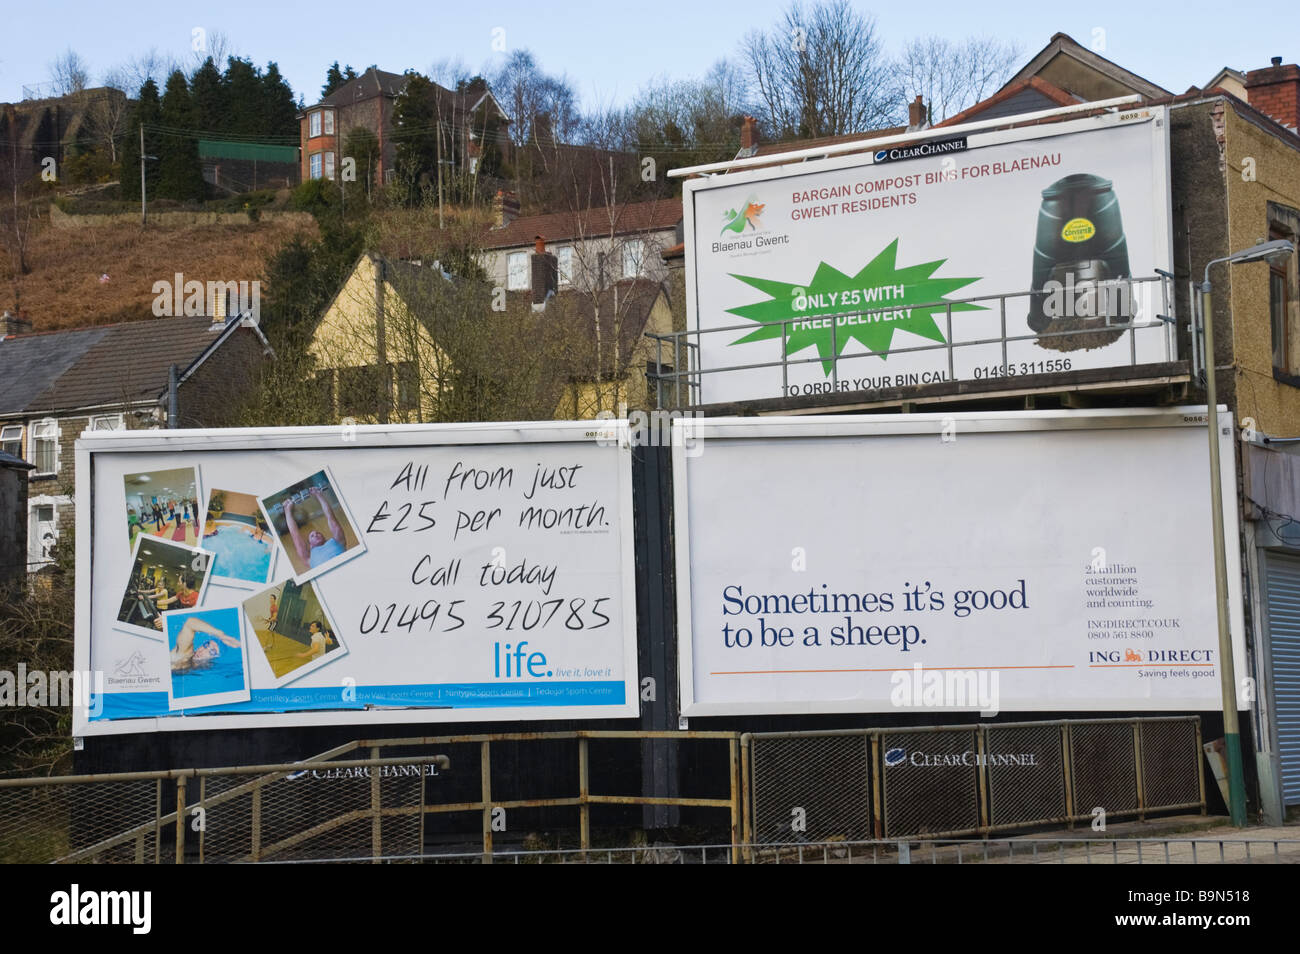 Multiple ClearChannel advertising billboards local council and ING Direct at Crumlin in South Wales Valleys UK Stock Photo